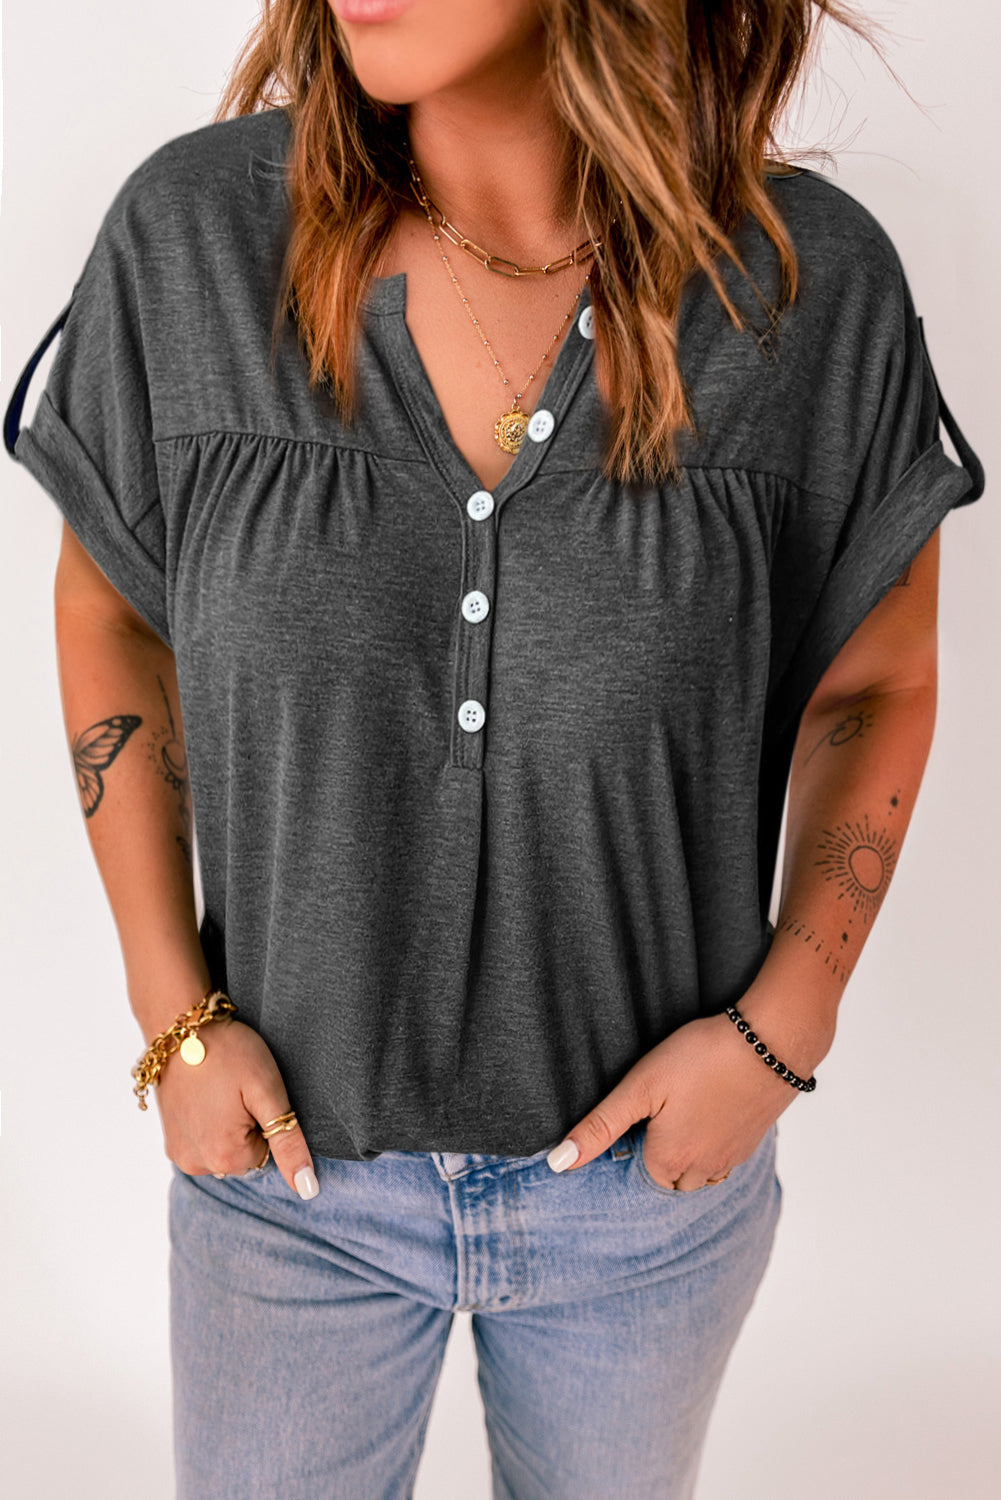 Gray Solid Button V Neck Short Sleeve Top - Cowtown Bling N Things